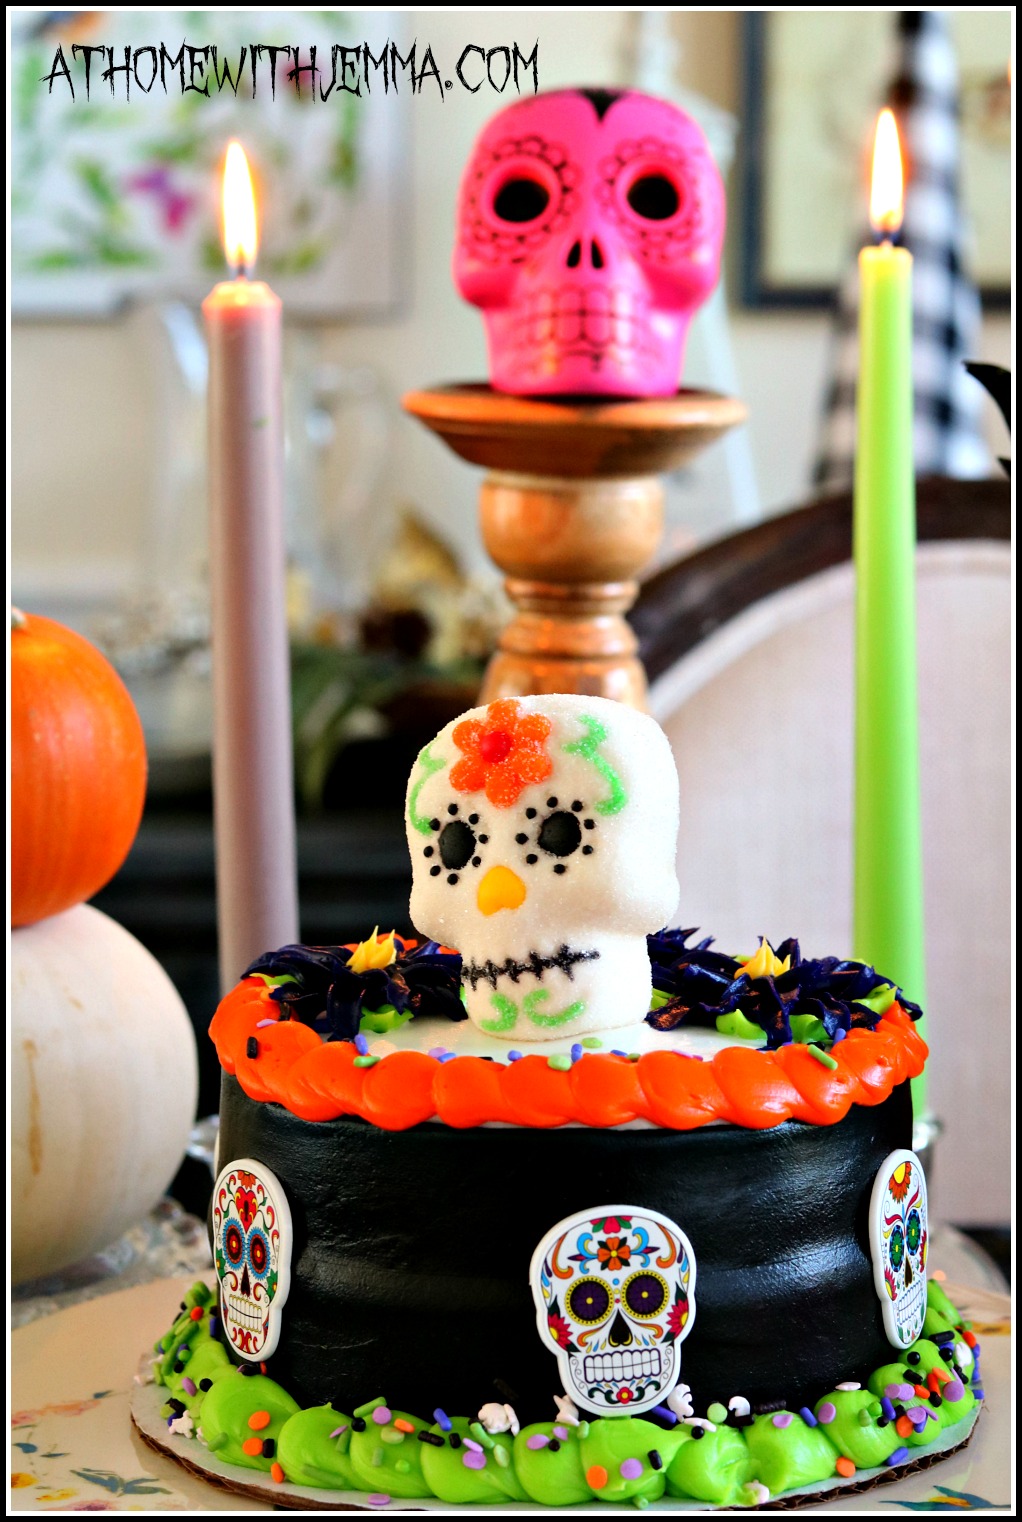 Skull Shaped Cake Tin. Make a Skull Shaped Cake for Halloween. Also Could  Be Used for a Day of the Dead Themed Celebration. 